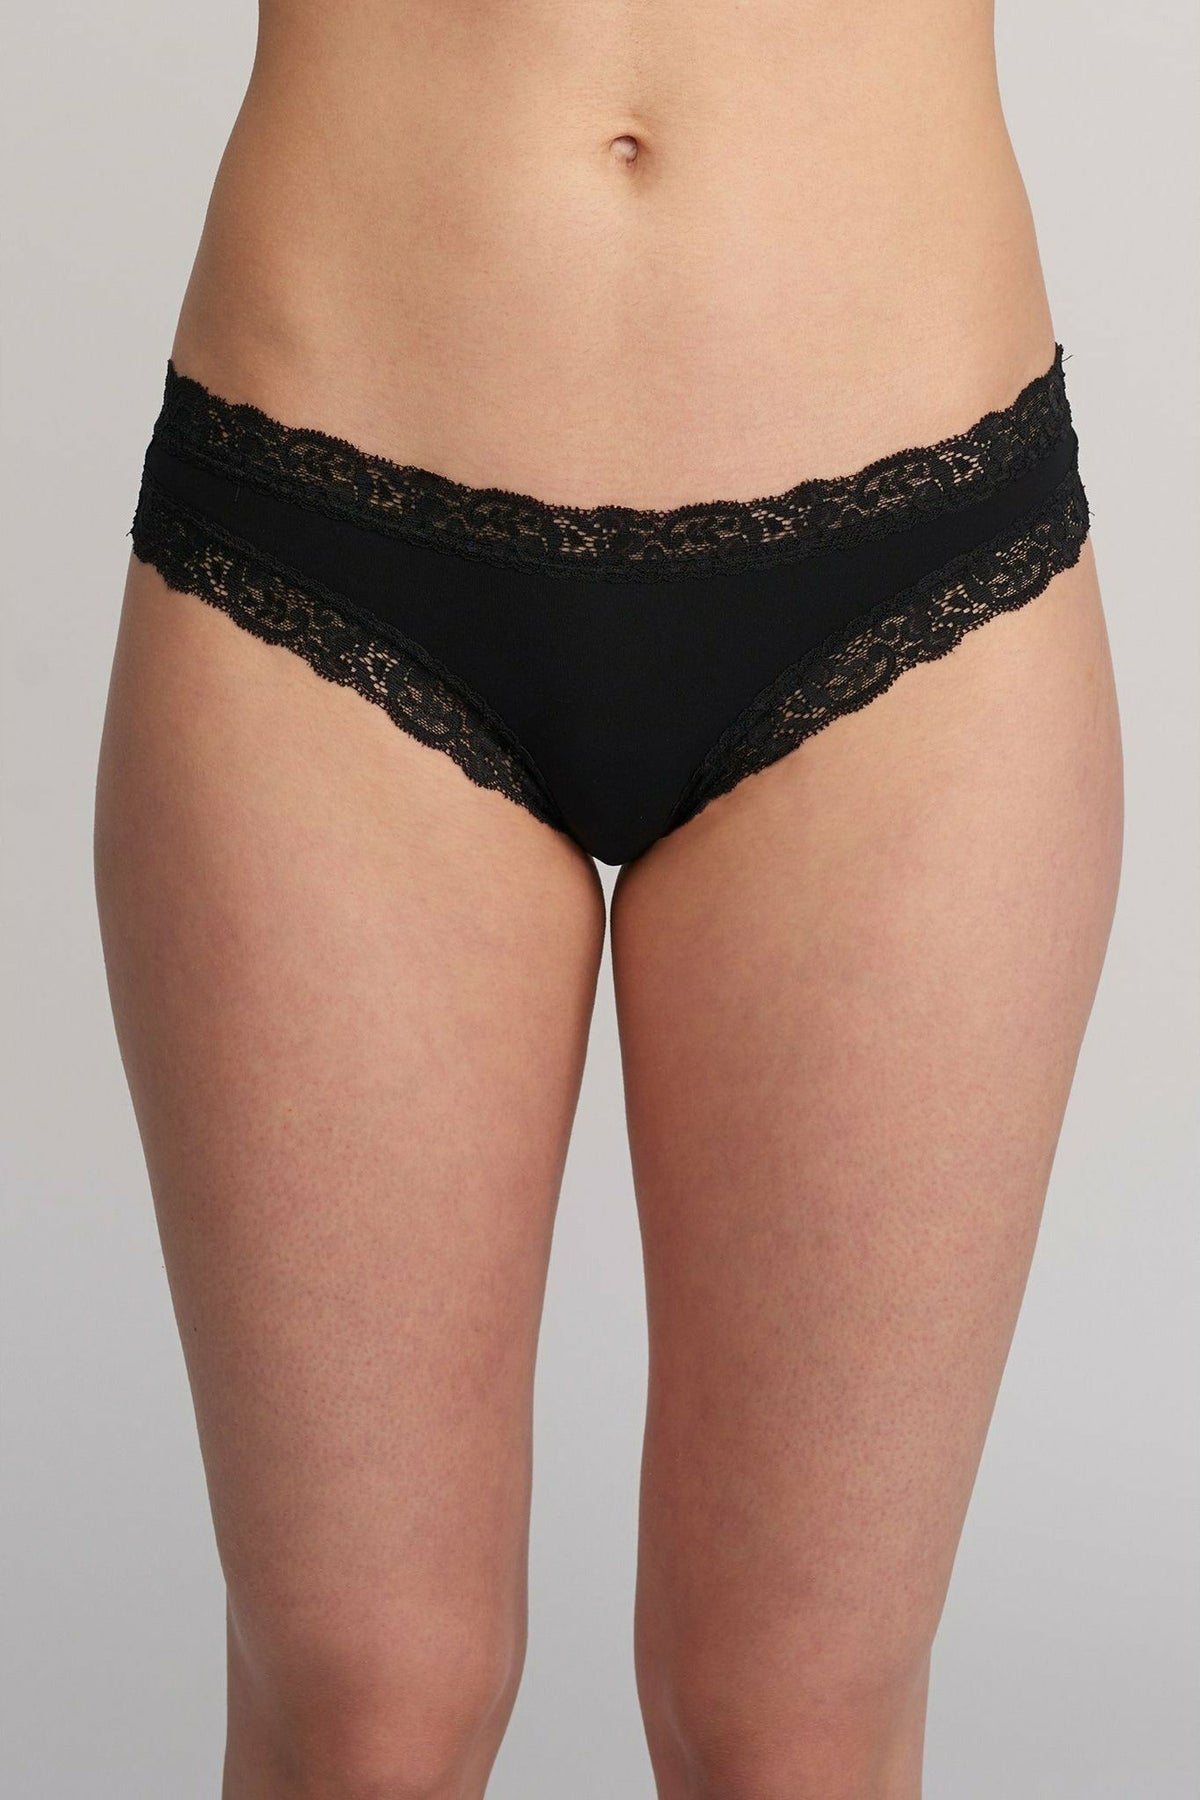 Fleur't Iconic Thong - Style 601, front, black